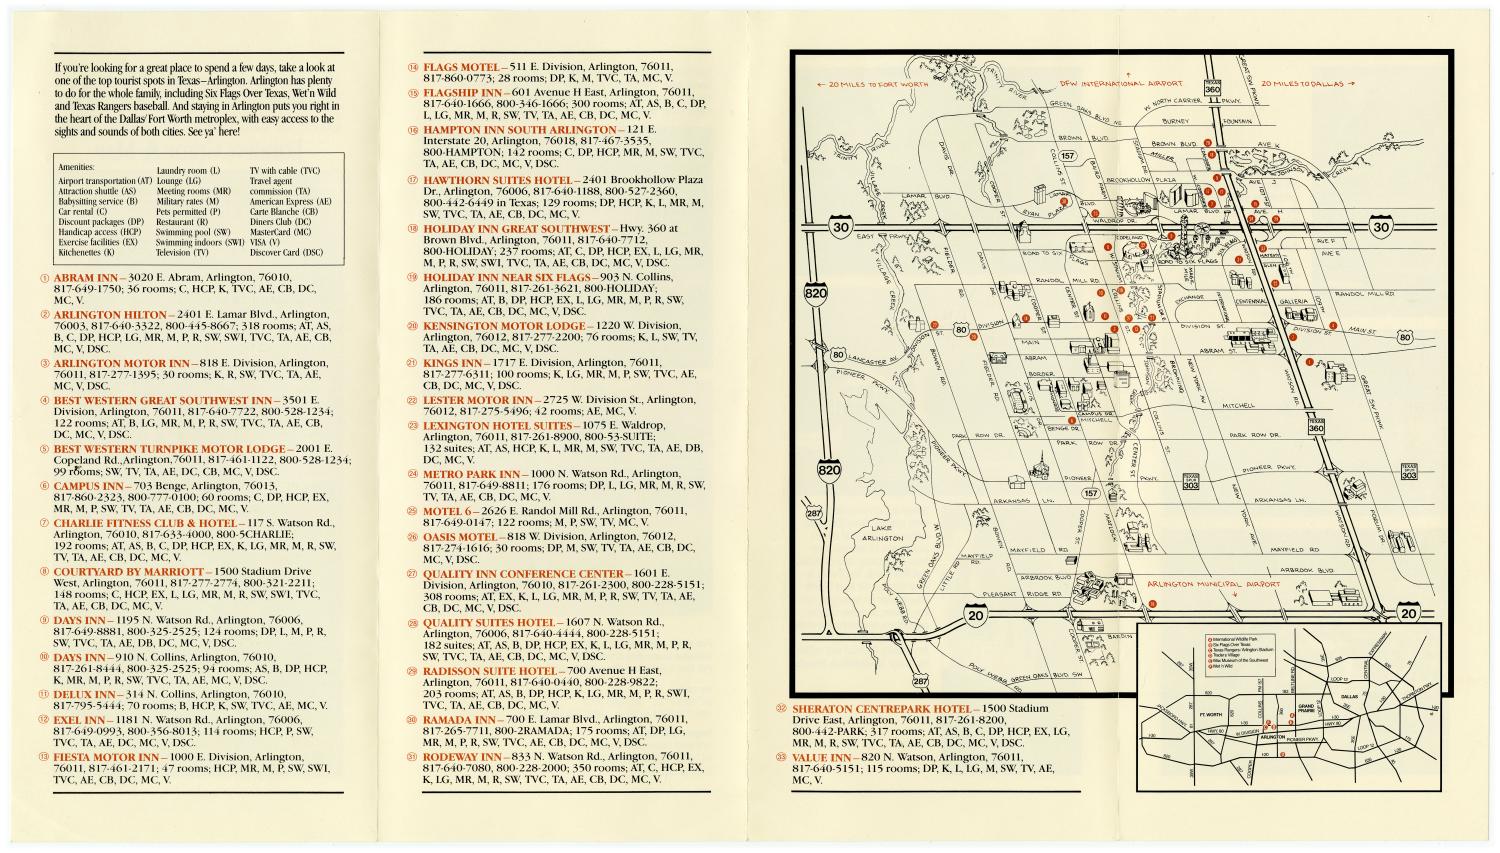 Arlington Texas Lodging Guide And Map Side 2 Of 2 The Portal To Texas History